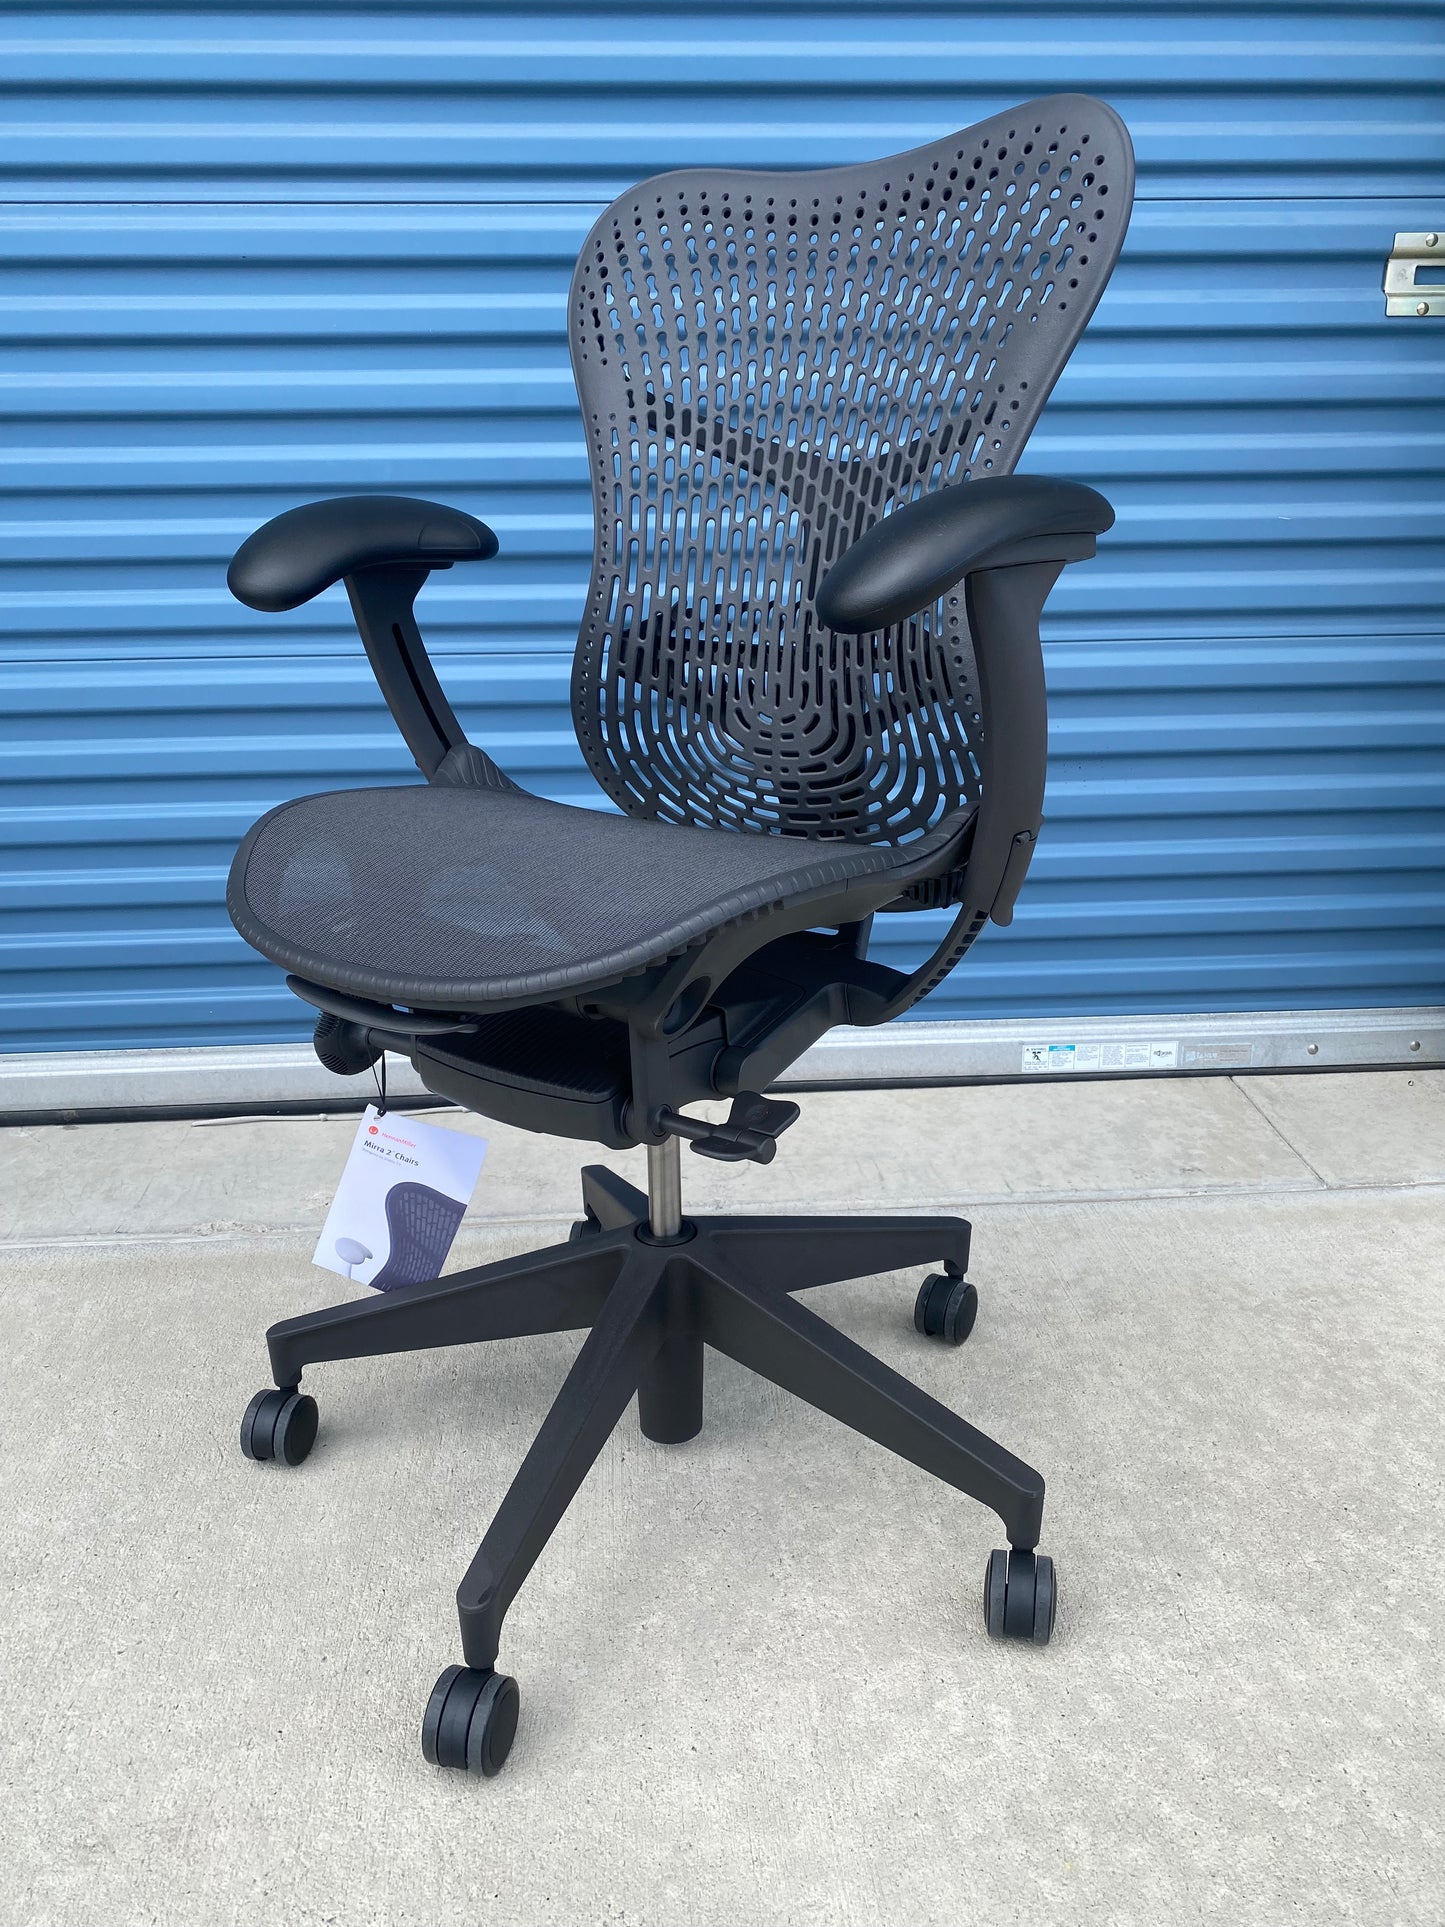 Brand new Herman Miller Mirra 2 fully loaded model with Triflex Polymer back in black